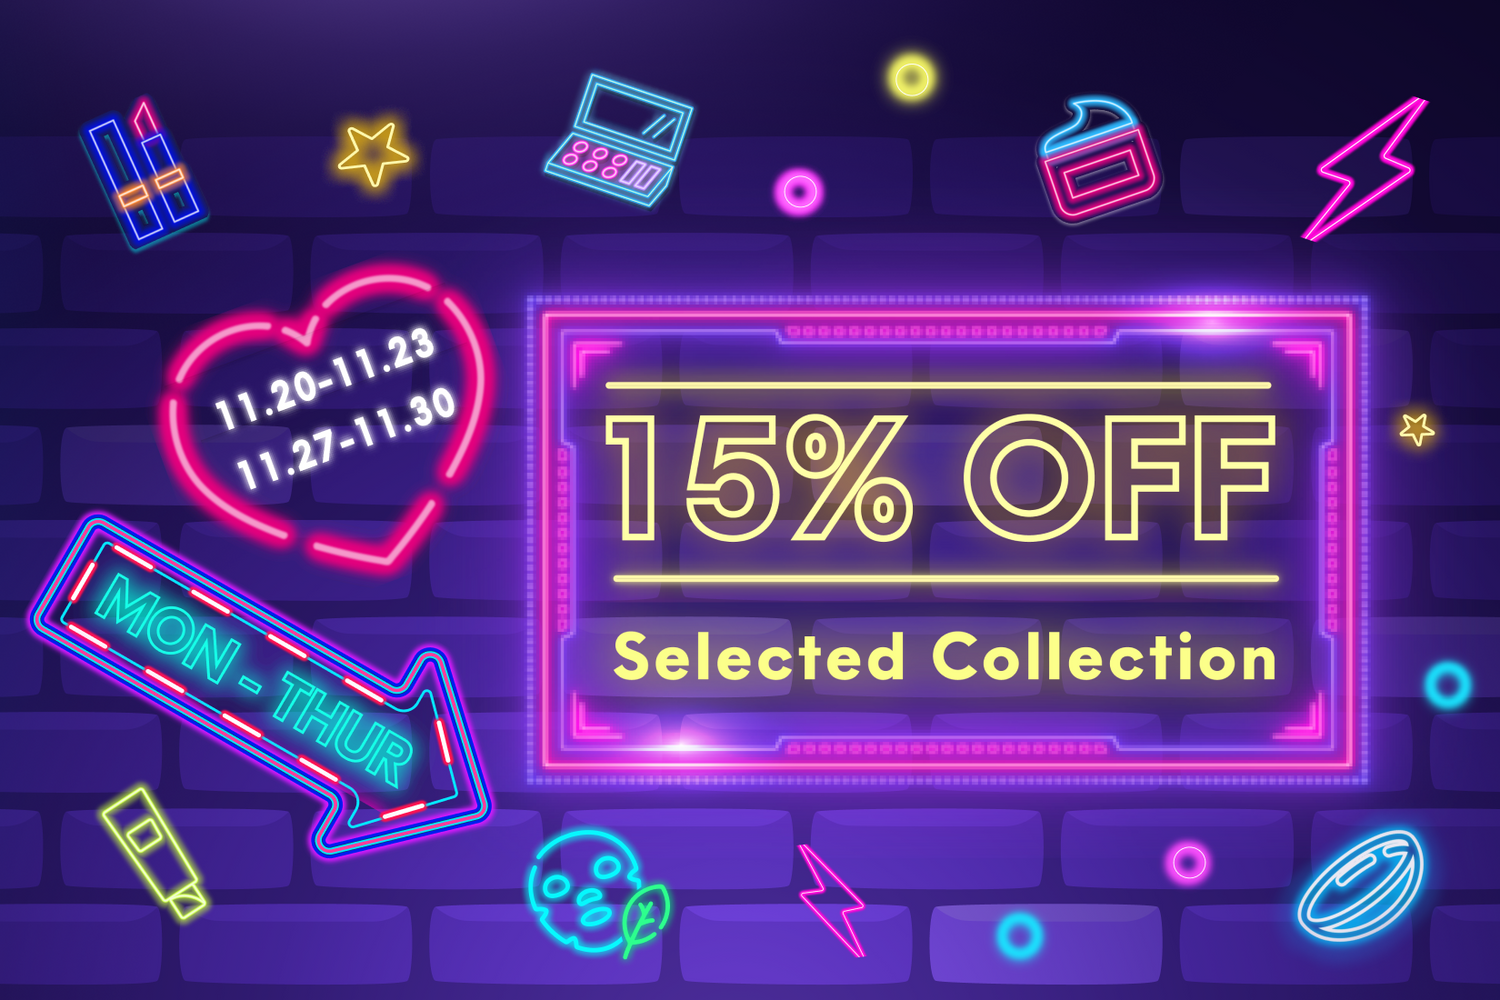 Black Friday - 15% off selected collection